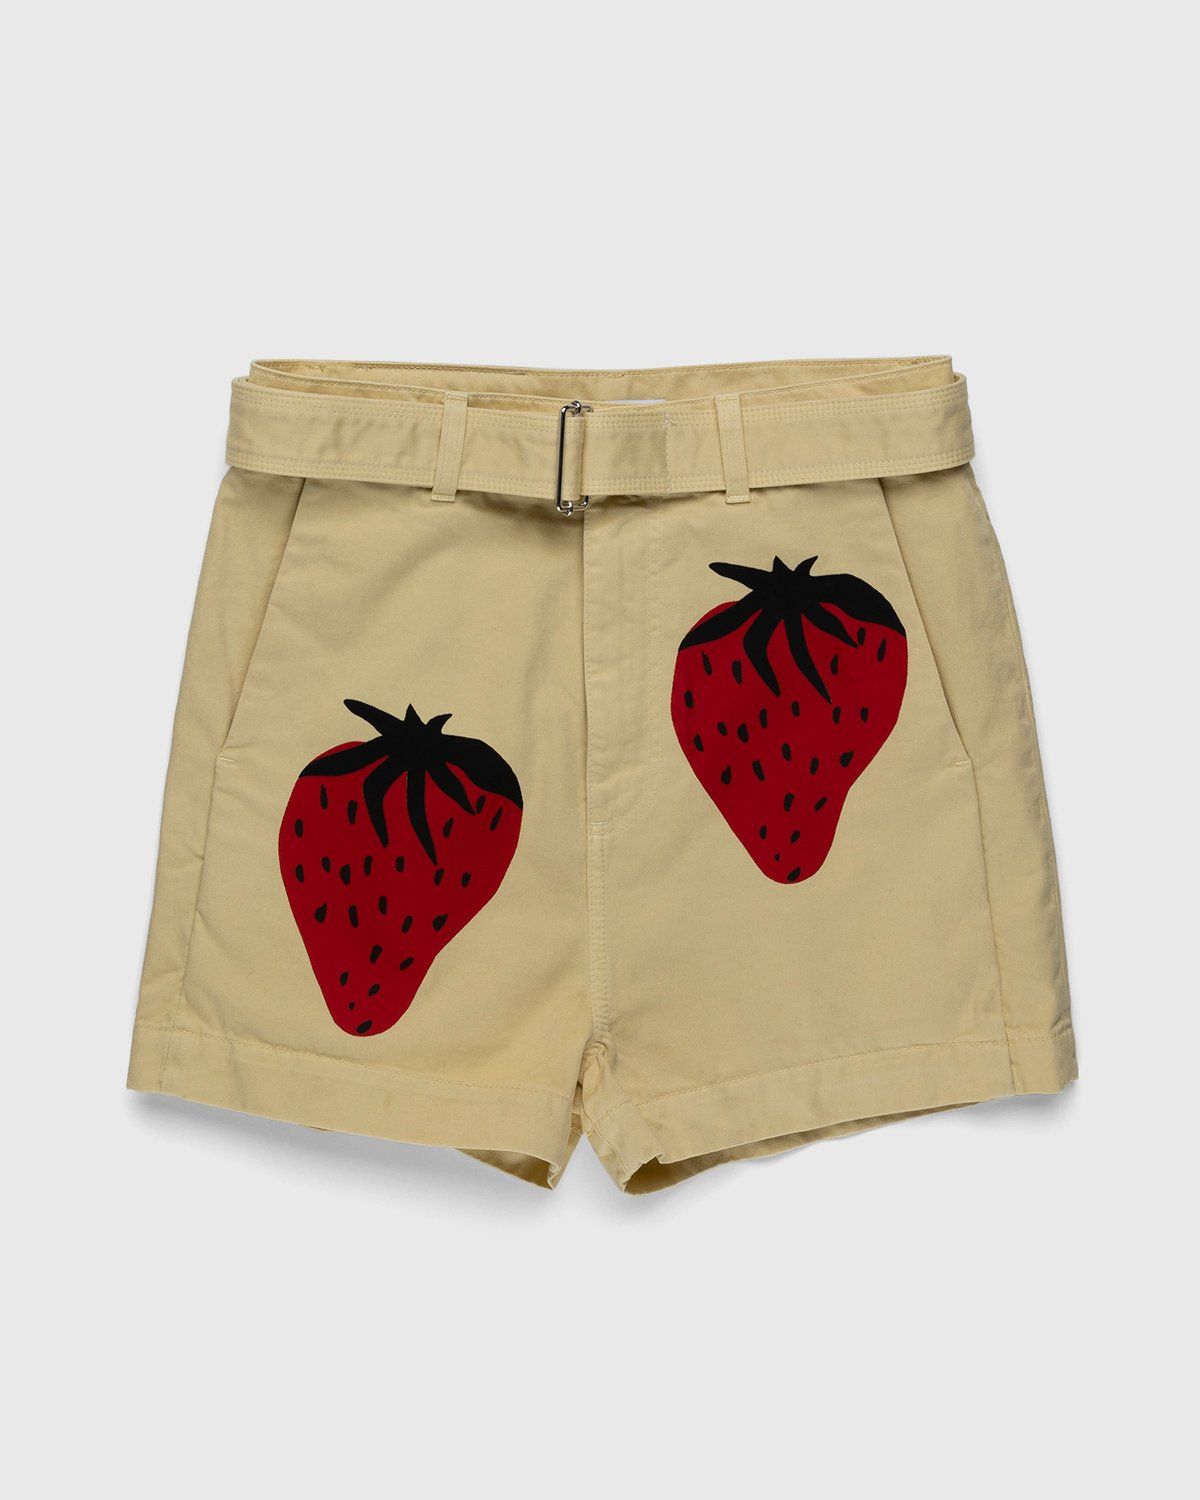 J.W. Anderson – Strawberry Chino Shorts Natural/Red | Highsnobiety Shop